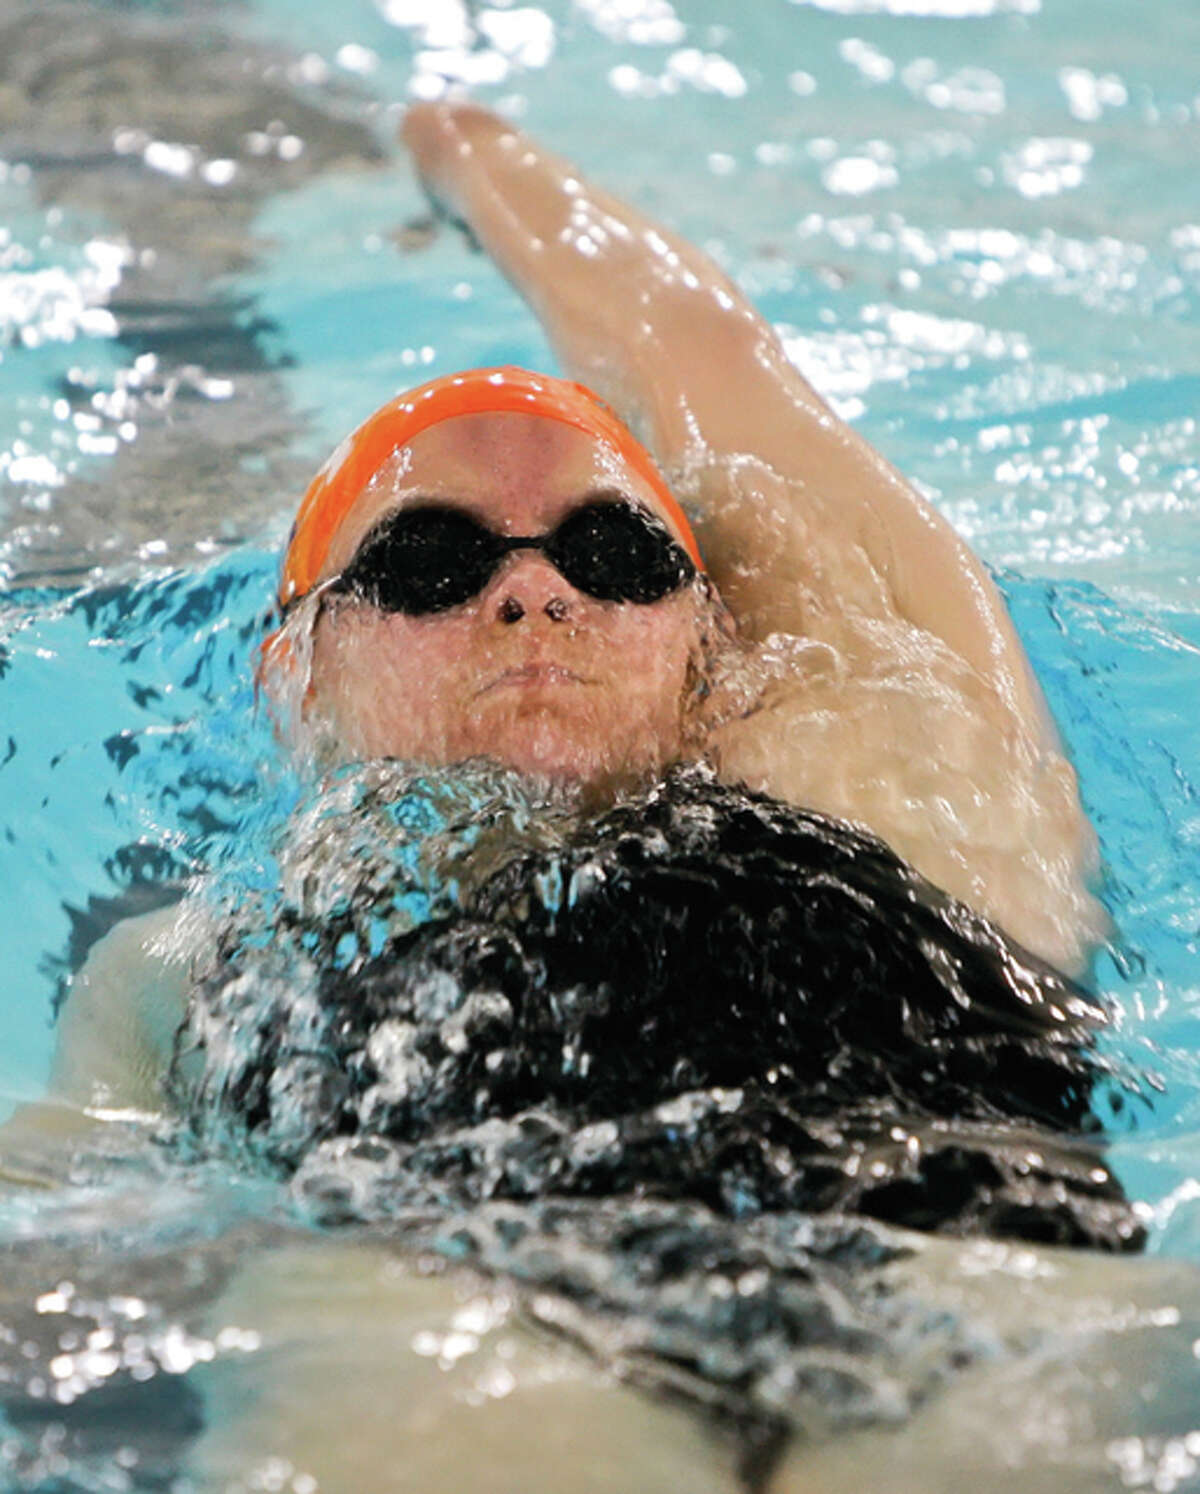 Edwardsville’s Elizaebth McPherson finished first the 100-yard backstroke in her team’s recent win over O’Fallon.